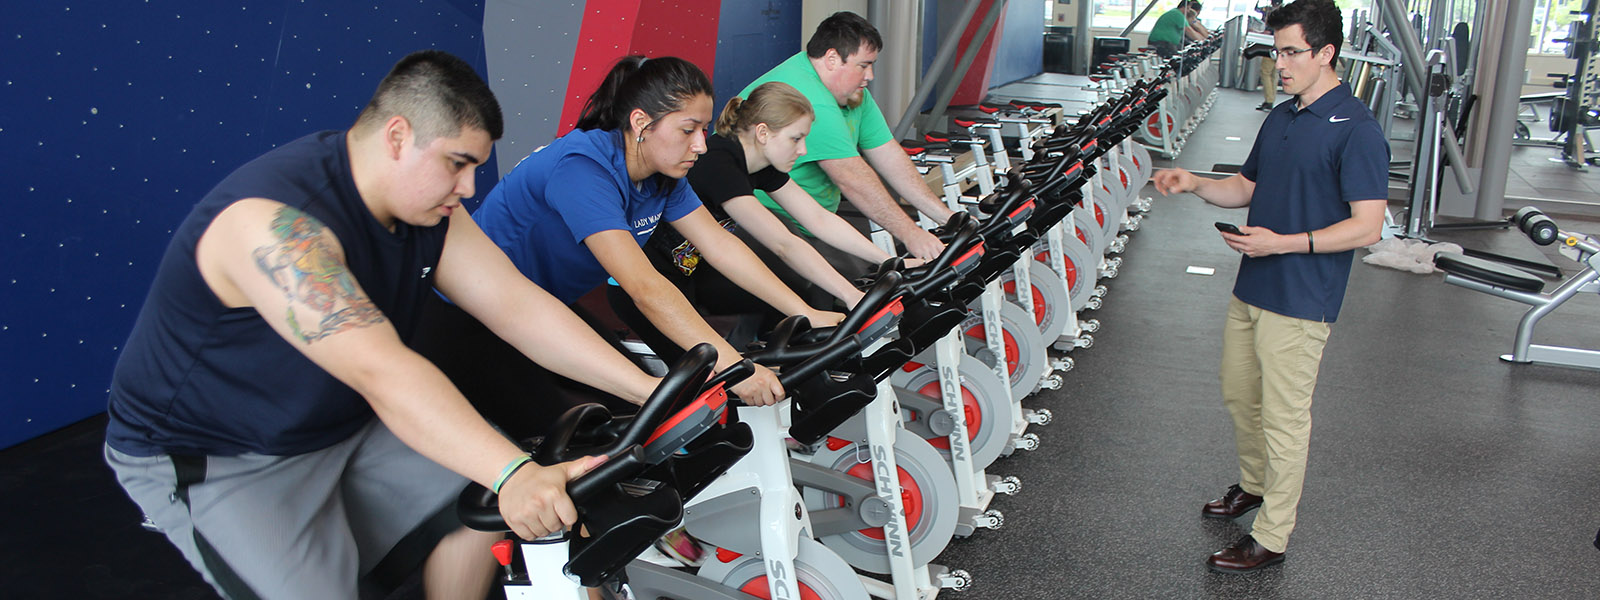 Image of students using exercise bicycles